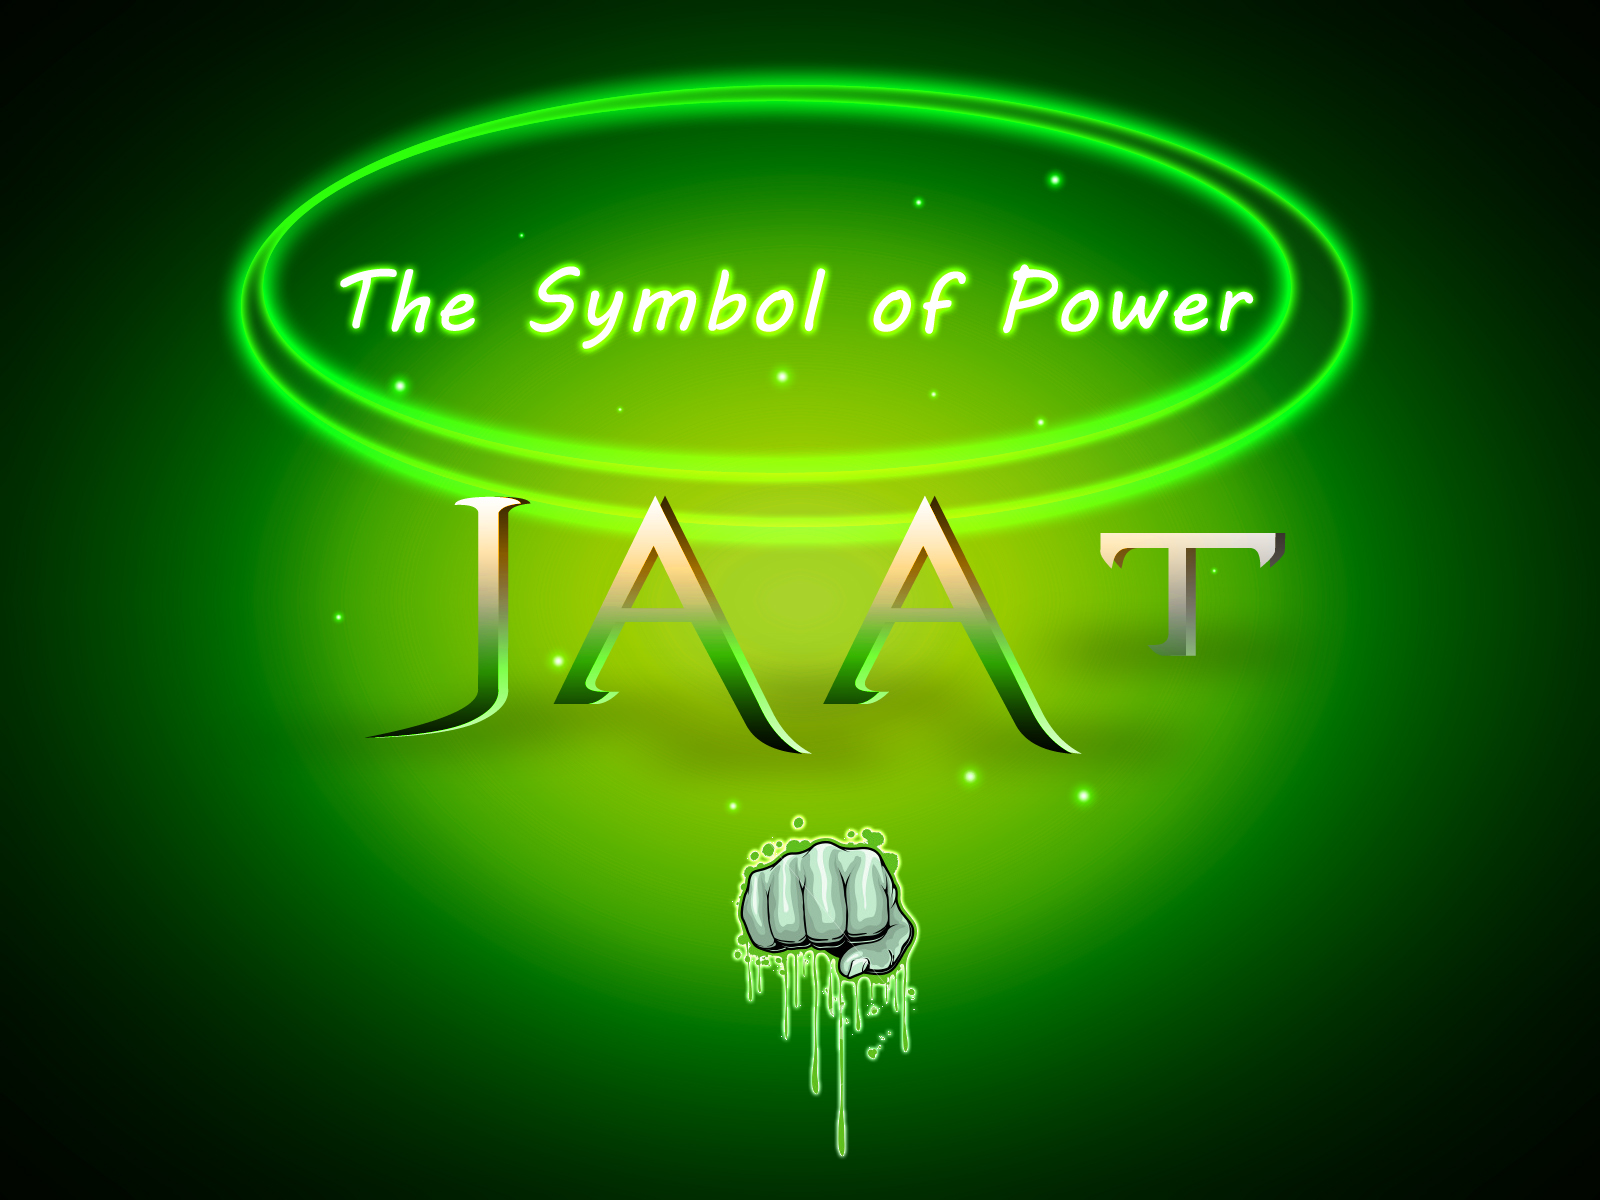 JAAT by pawanchaudhary on DeviantArt